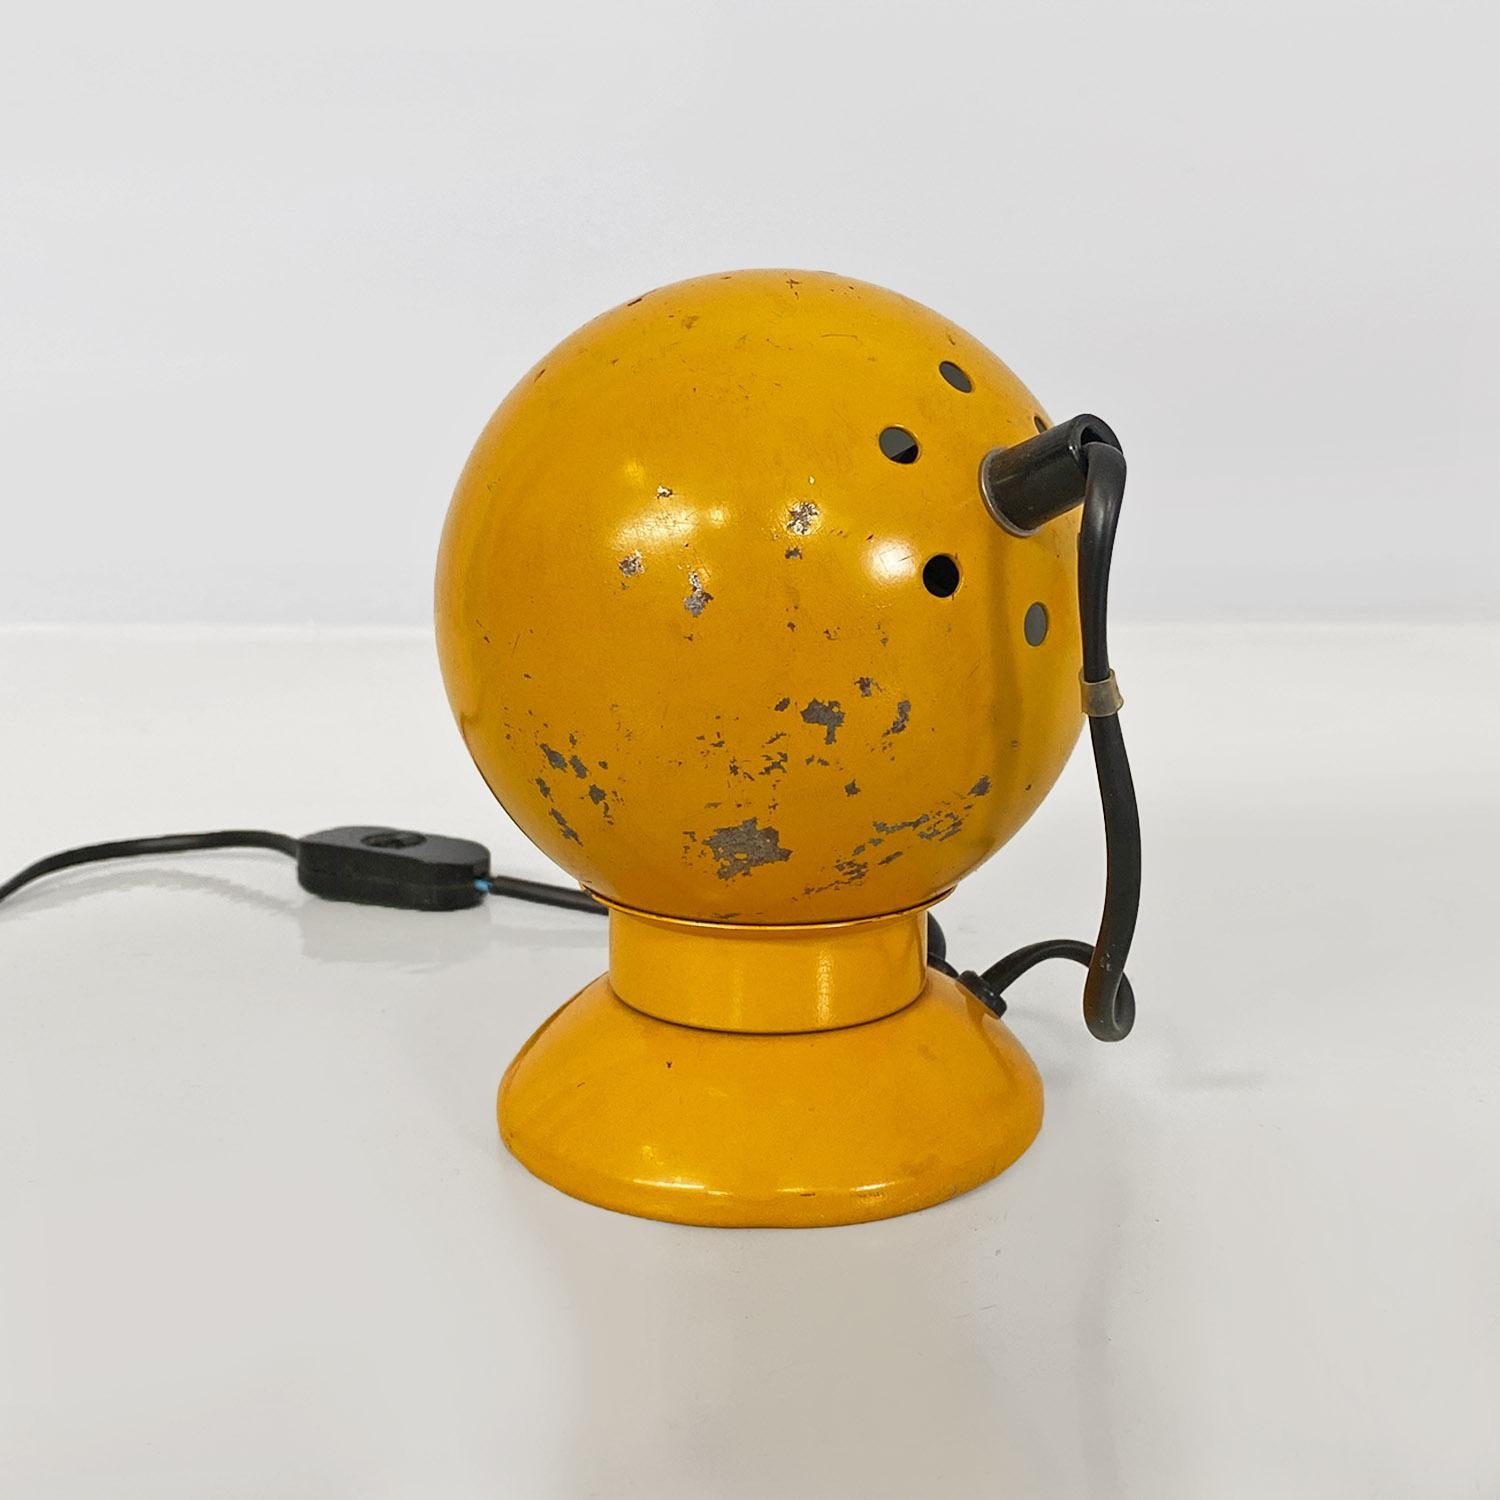 Italian modern yellow metal table lamps or applique by Goffredo Reggiani, 1970s For Sale 2